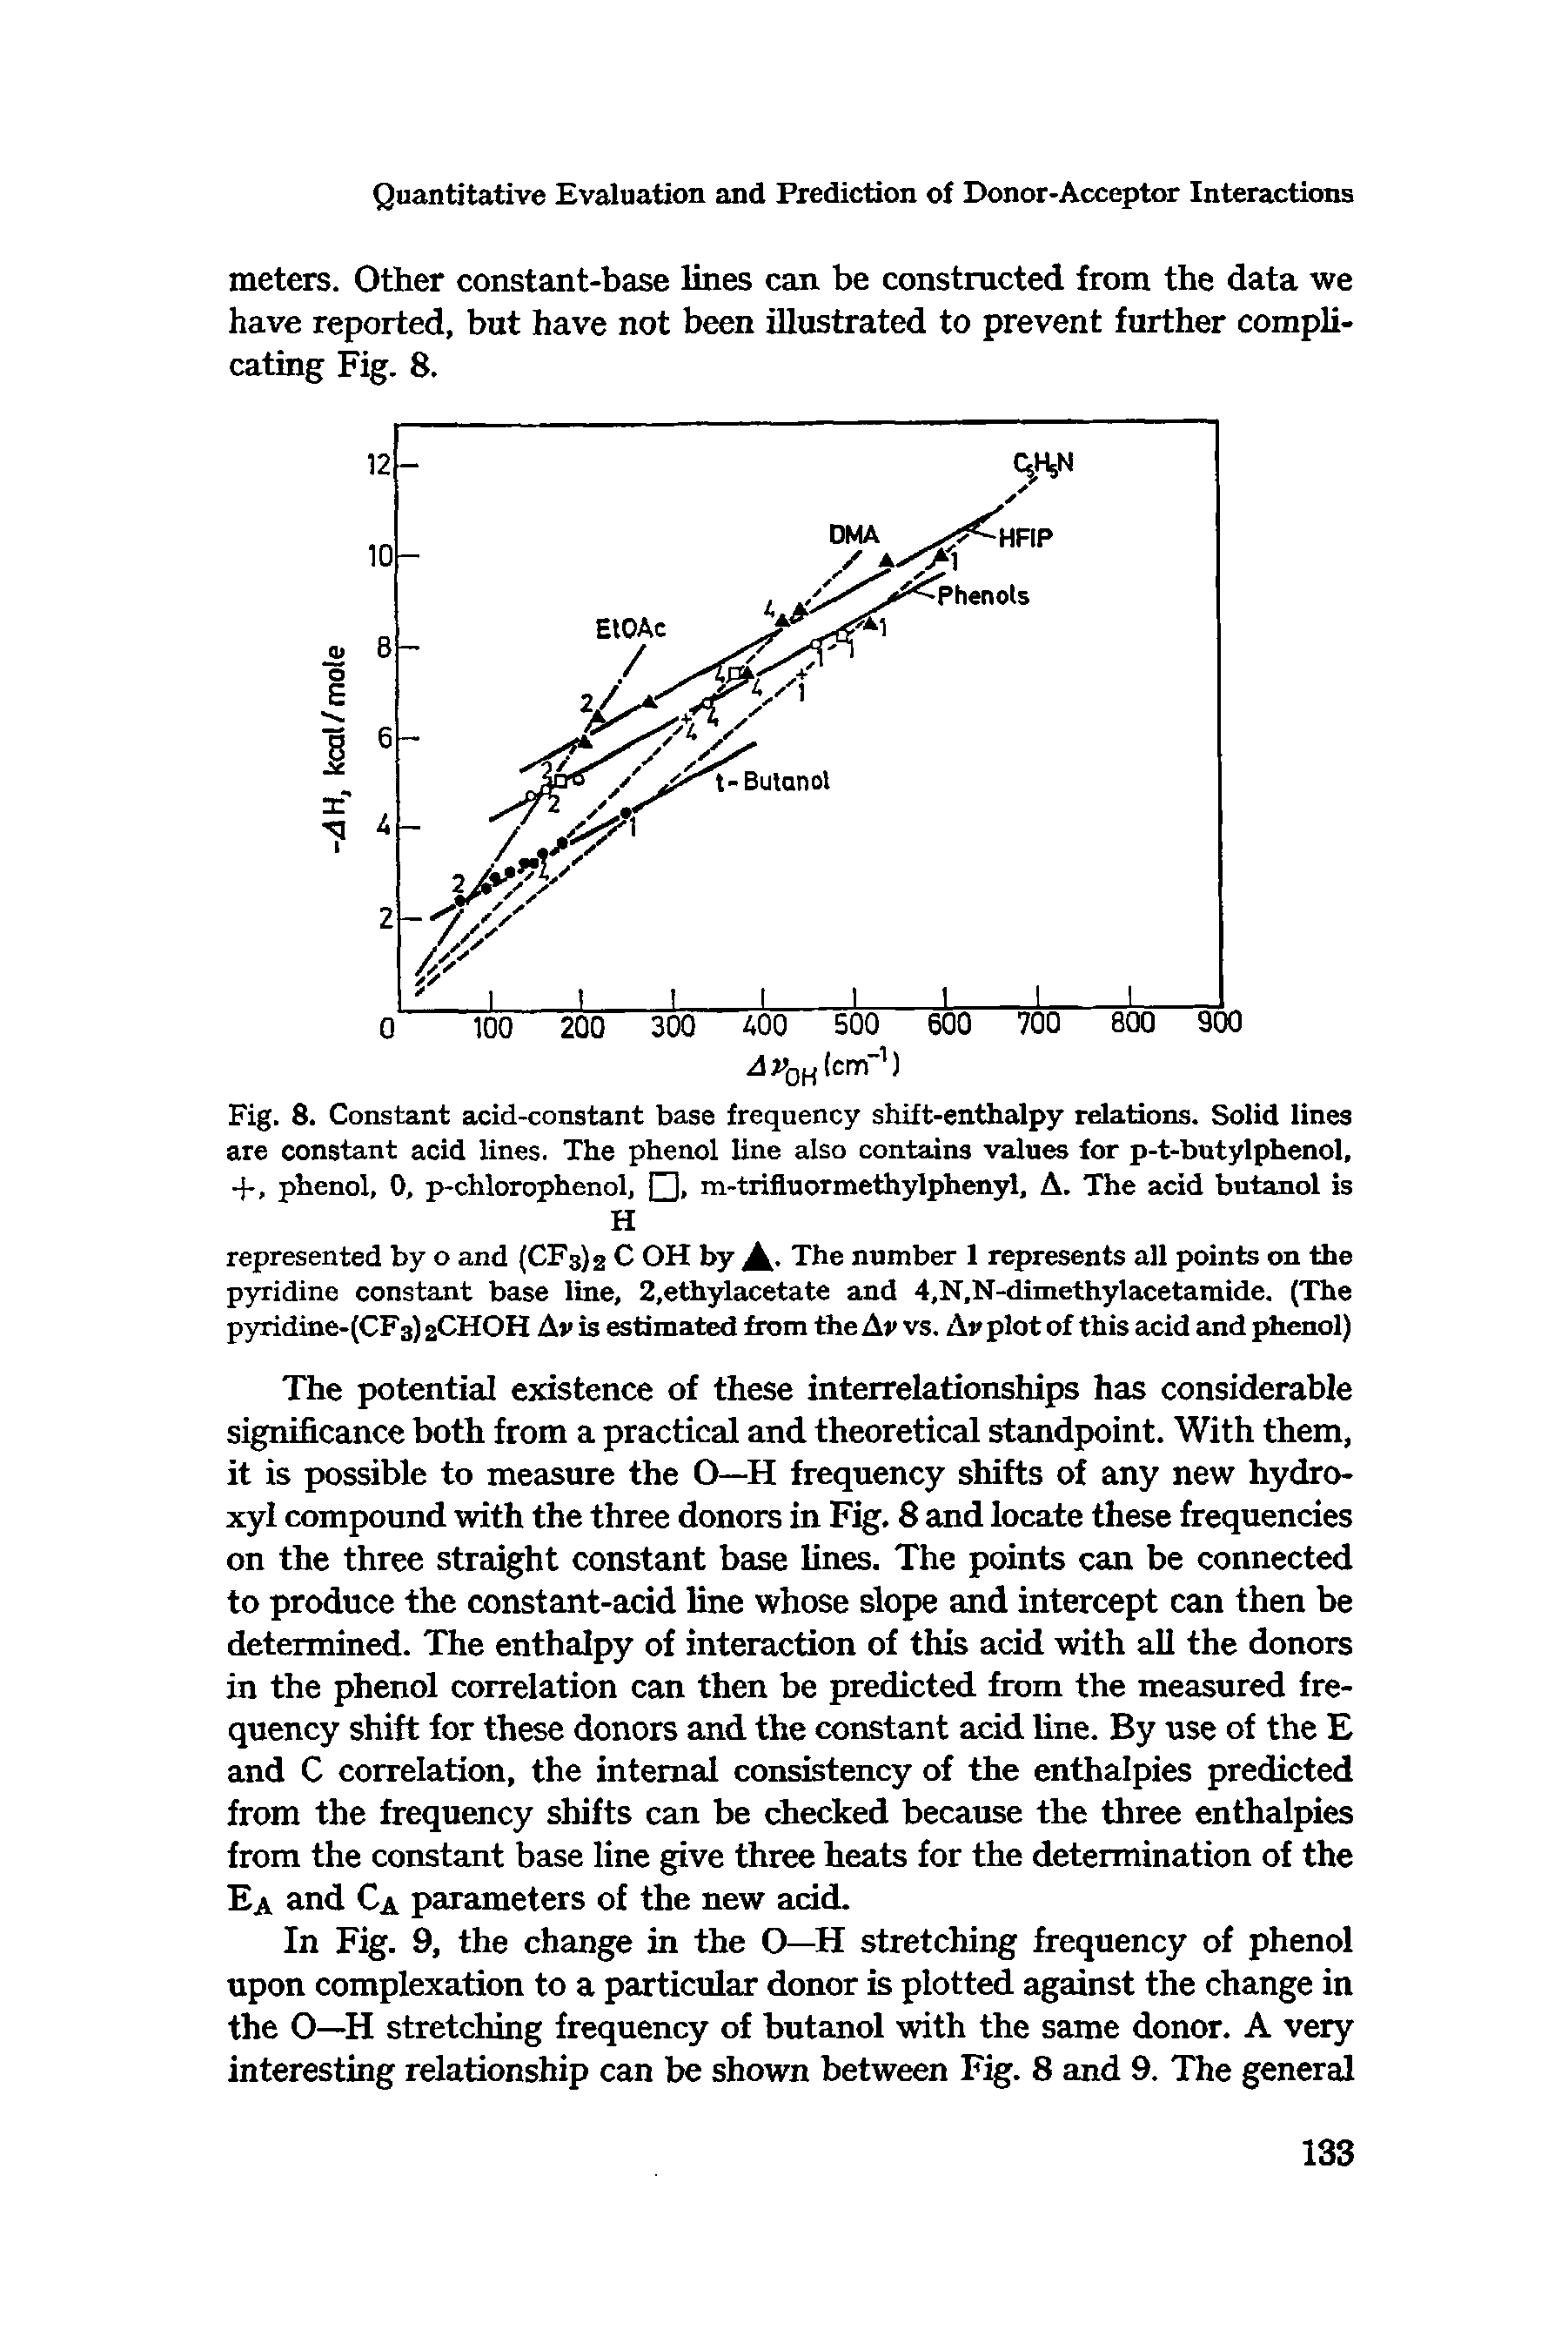 Fig. 8. Constant acid-constant base frequency shift-enthalpy relations. Solid lines are constant acid lines. The phenol line also contains values for p-t-butylphenol, 4-, phenol, 0, p-chlorophenol, , m-trifluormethylphenyl, A. The acid butanol is H...